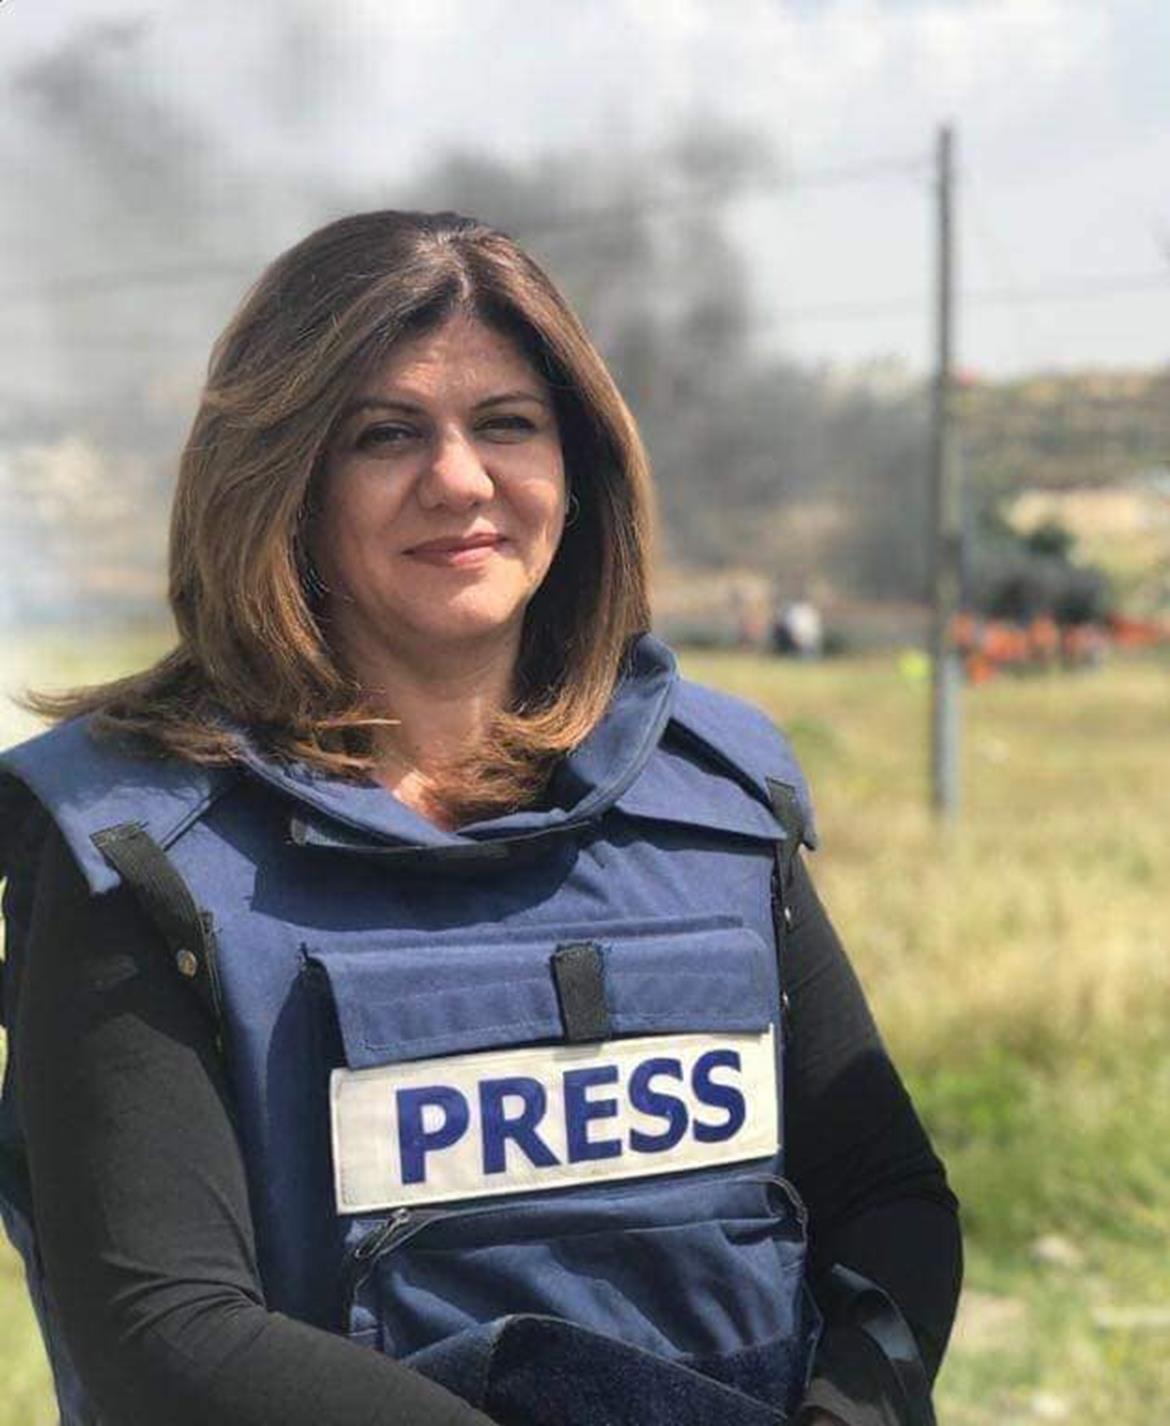 Two major US media outlets confirm Palestinian journalist Shireen Abu Akleh was killed by Israeli gunfire